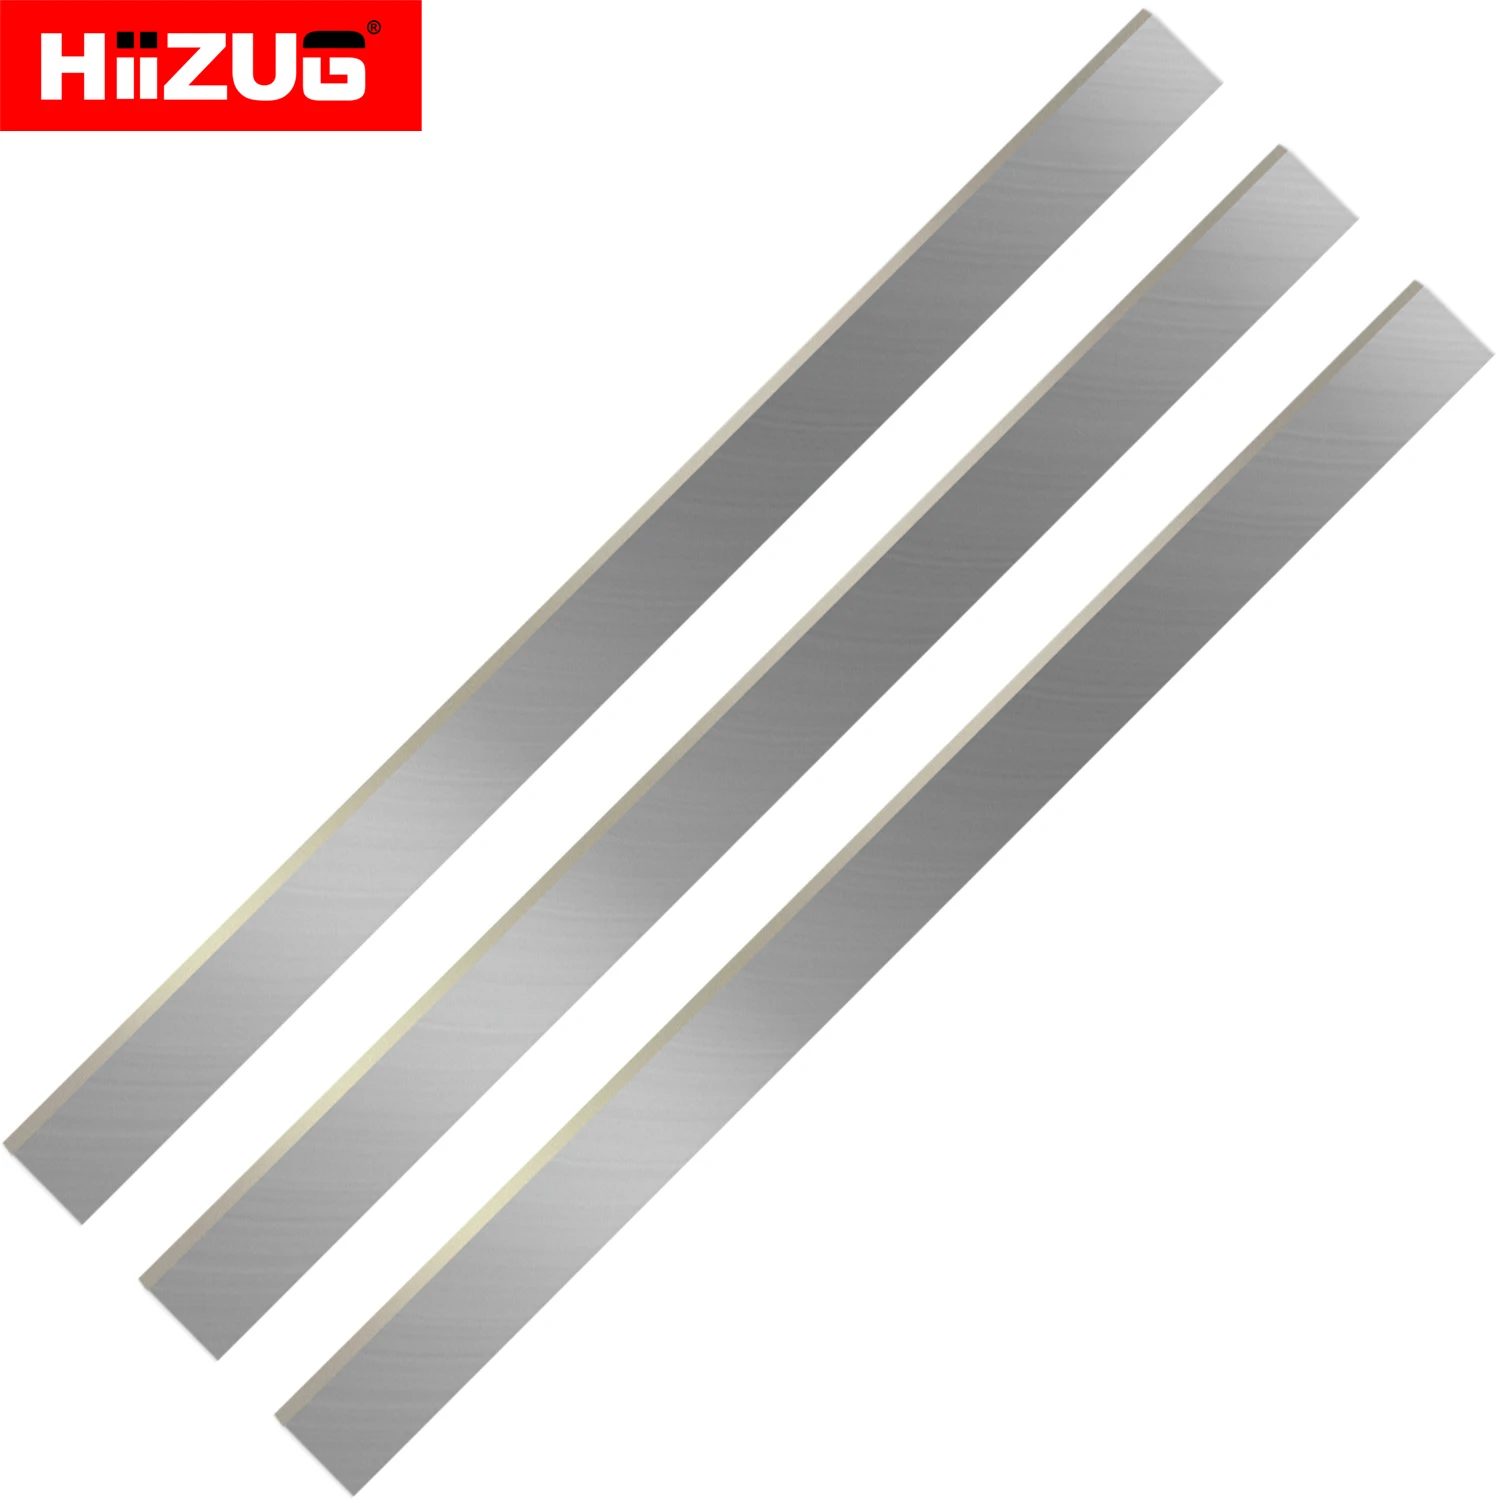 483×25×3mm Planer Blades Knife for 19''  Cutter Heads of Electric Thicknesser Planer Jointer  HSS TCT Set of 3 Pieces 210×25×3mm planer blades knife for woodworking thicknesser surface planer jointer cutterhead eads set of 3 pieces